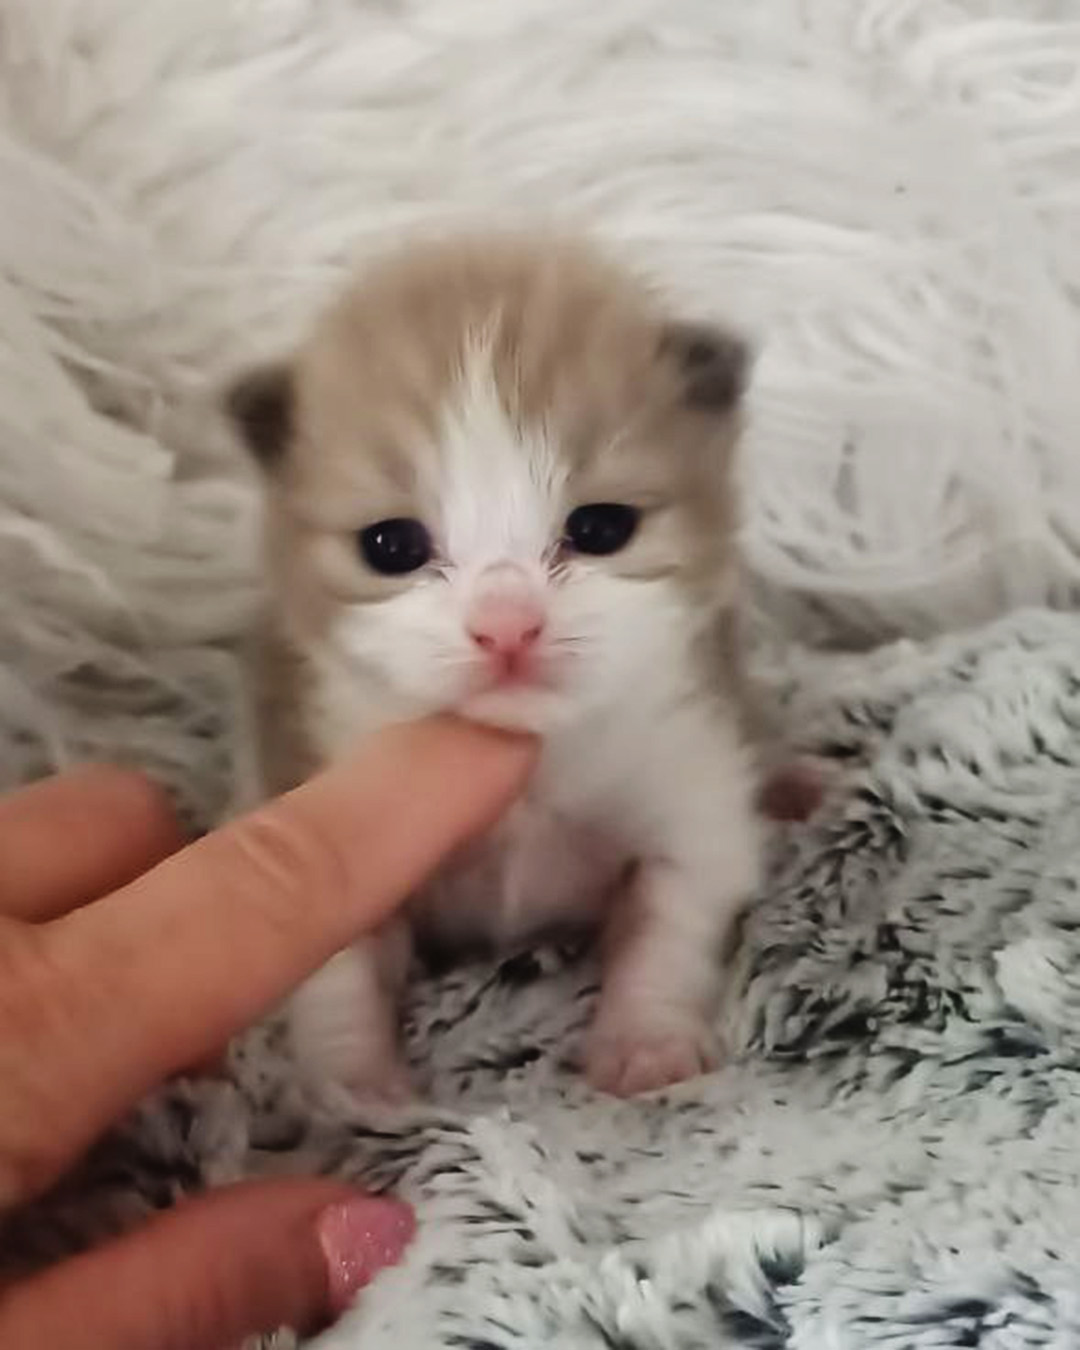 The first kitten born this year